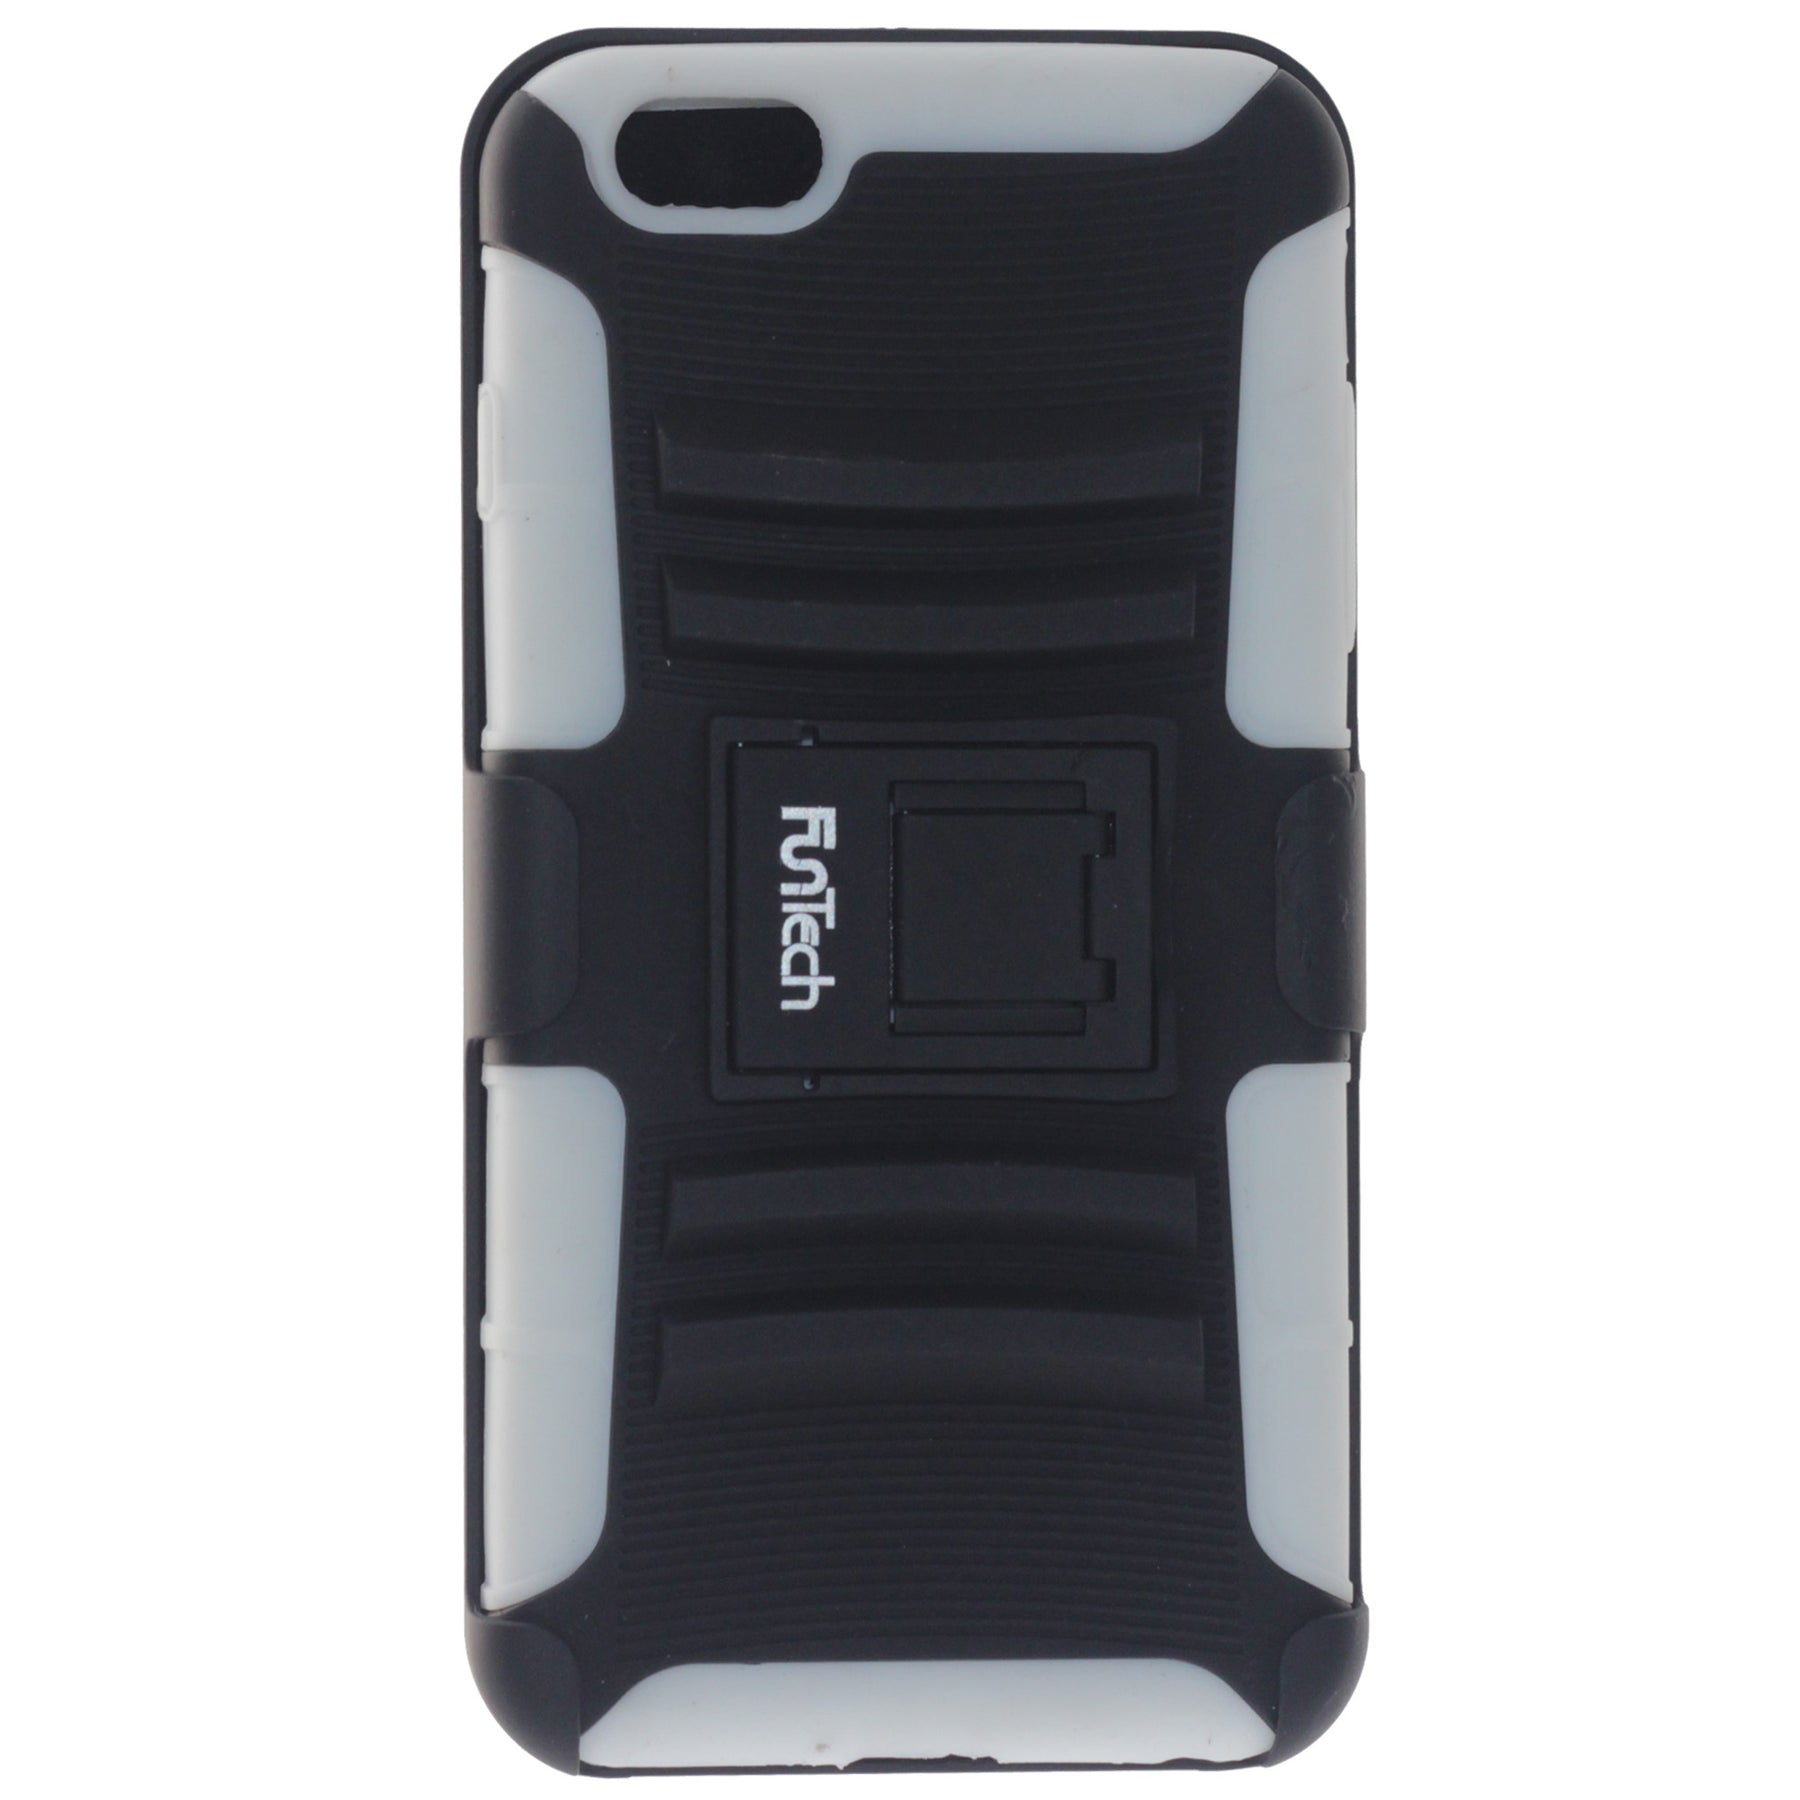 Apple iPhone 6/6S Plus Rugged Shockproof Case with Beltclip, Color White/Black